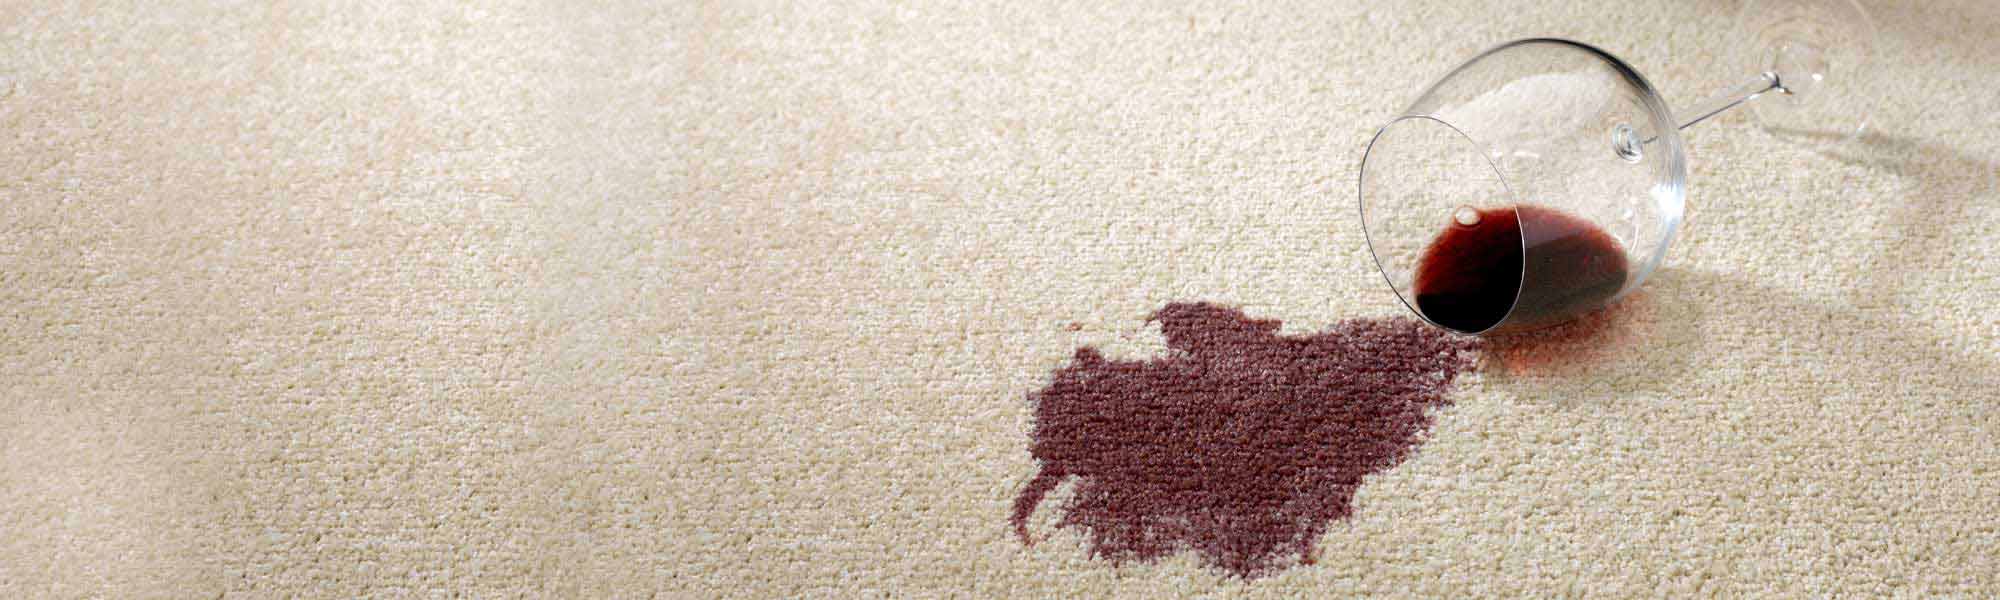 Professional Stain Removal Service by Chem-Dry of Napa Valley in Napa CA